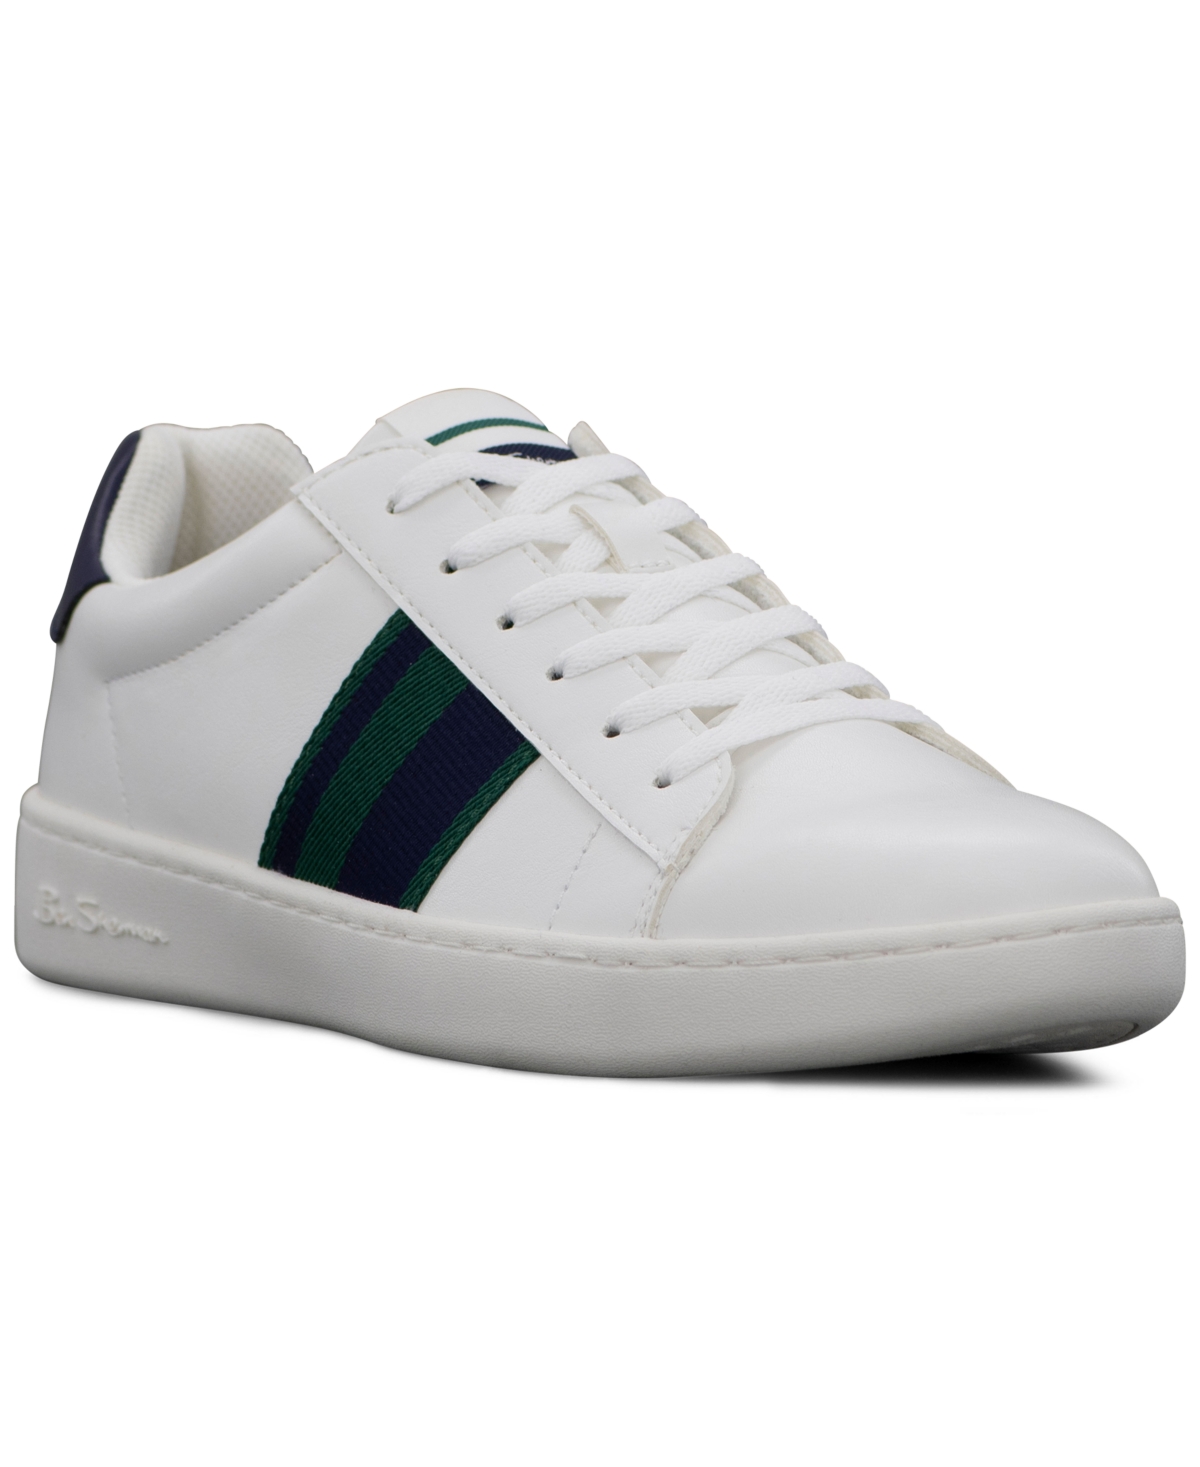 Men's Hampton Stripe Low Court Casual Sneakers from Finish Line - White/Navy